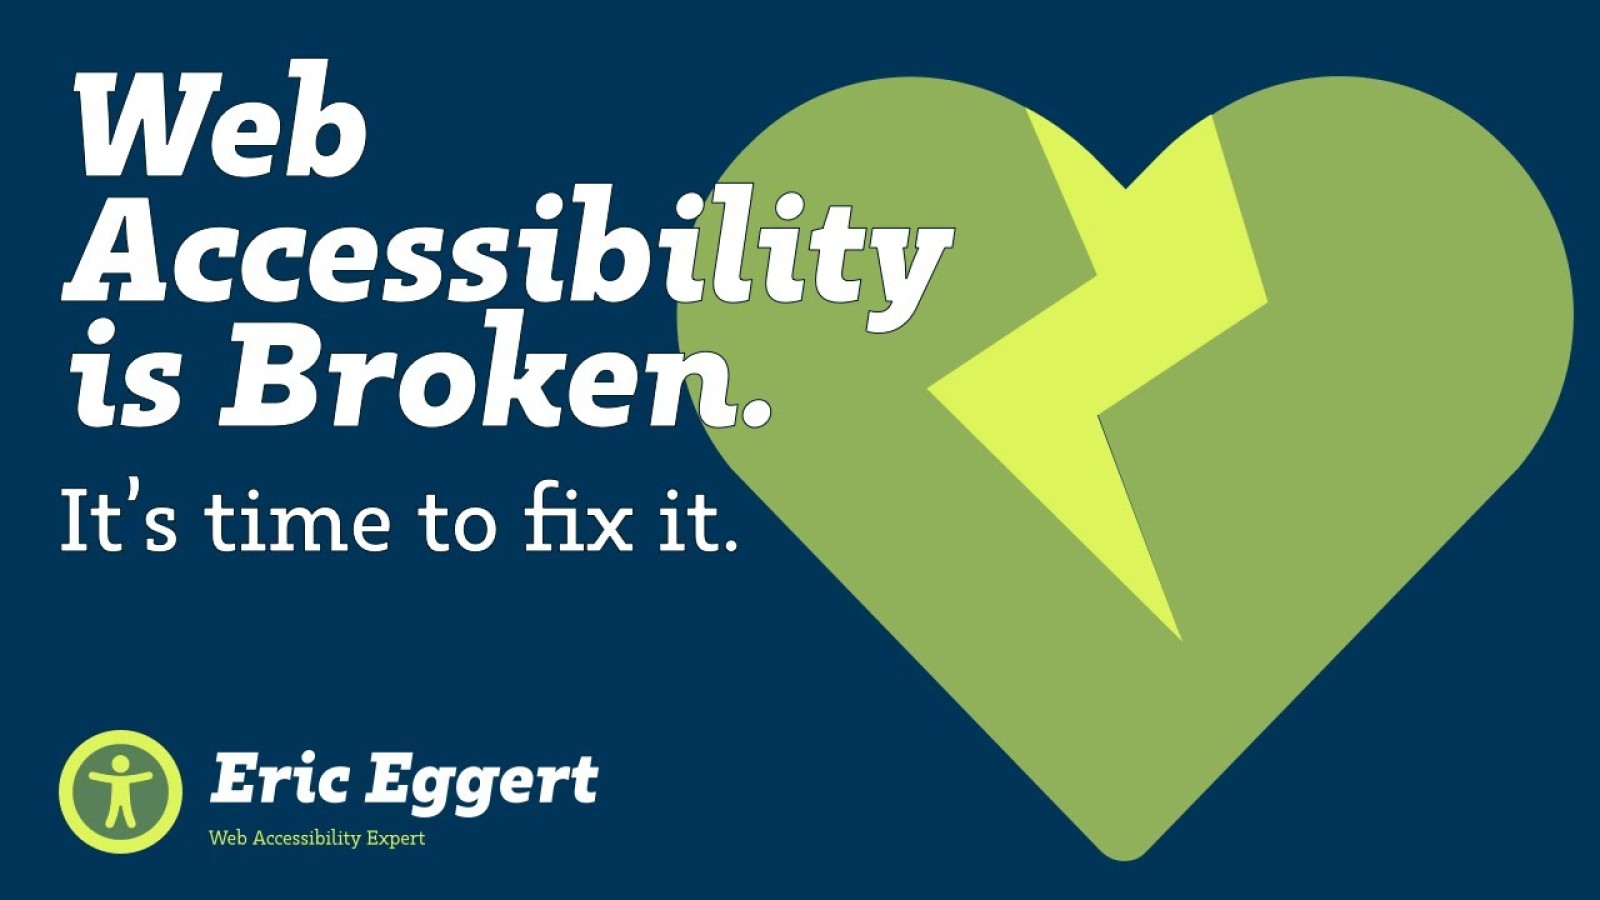 Web Accessibility is broken. It’s time to fix it.